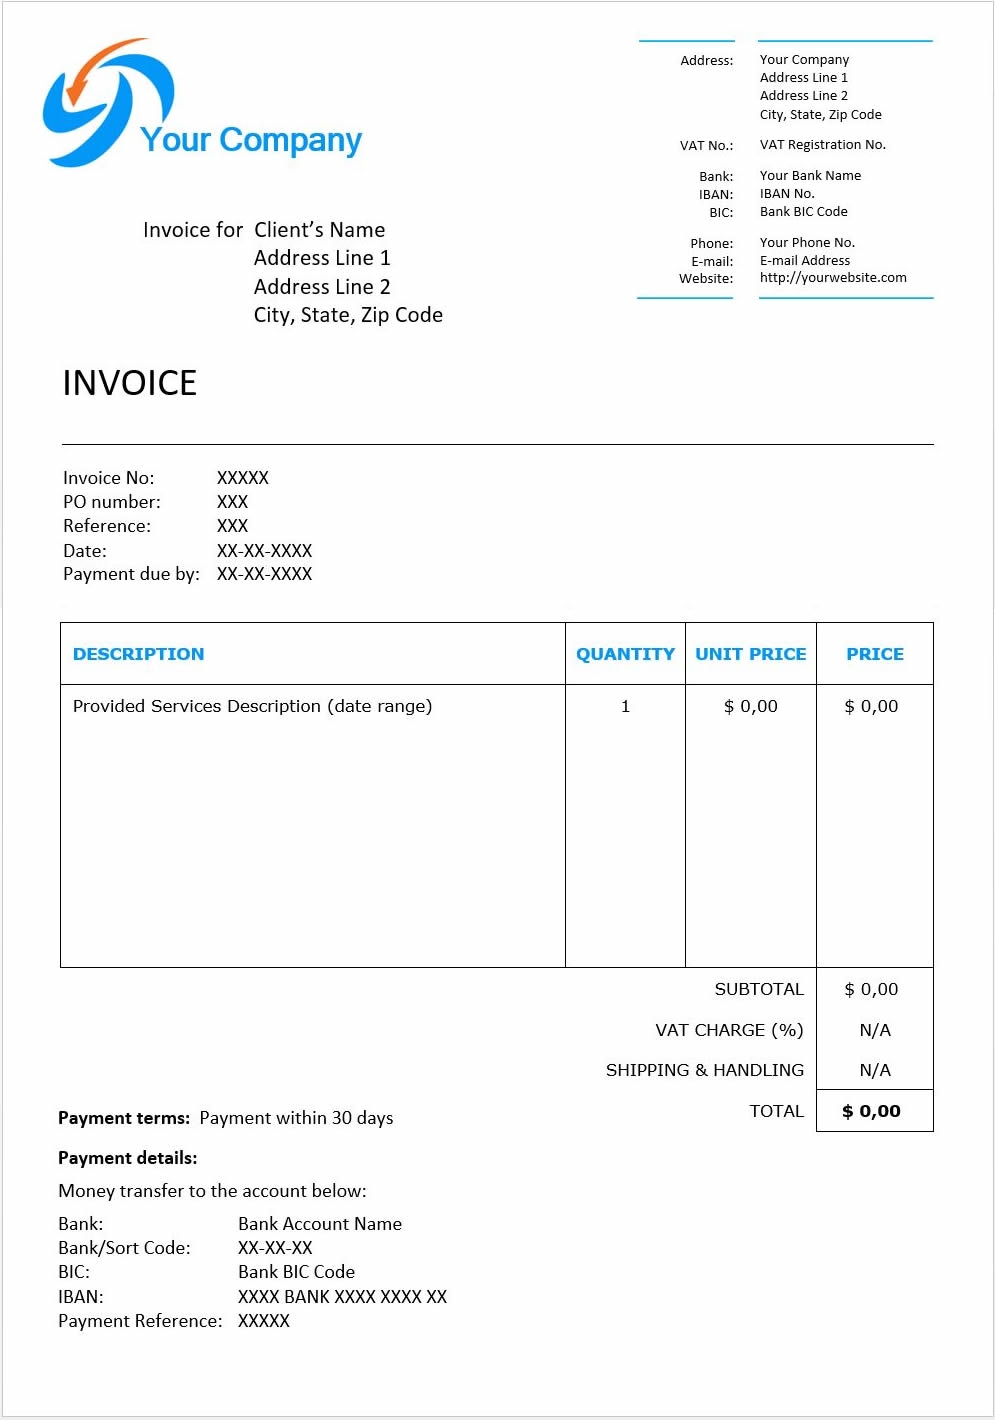 invoice example english download free template for word invoice in english